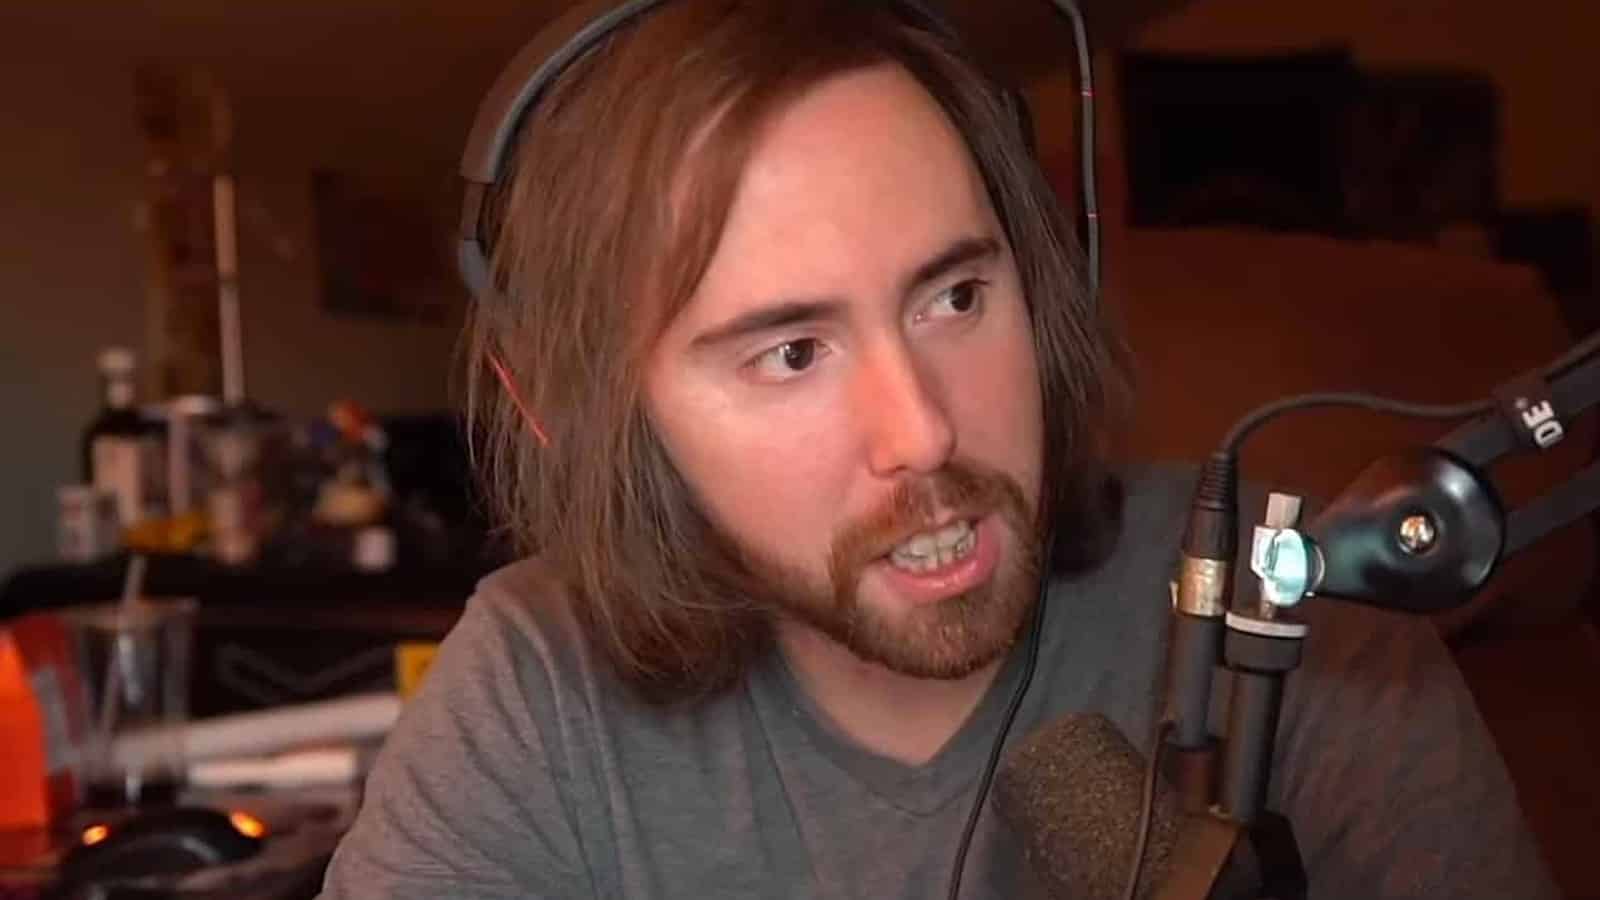 asmongold in twitch stream